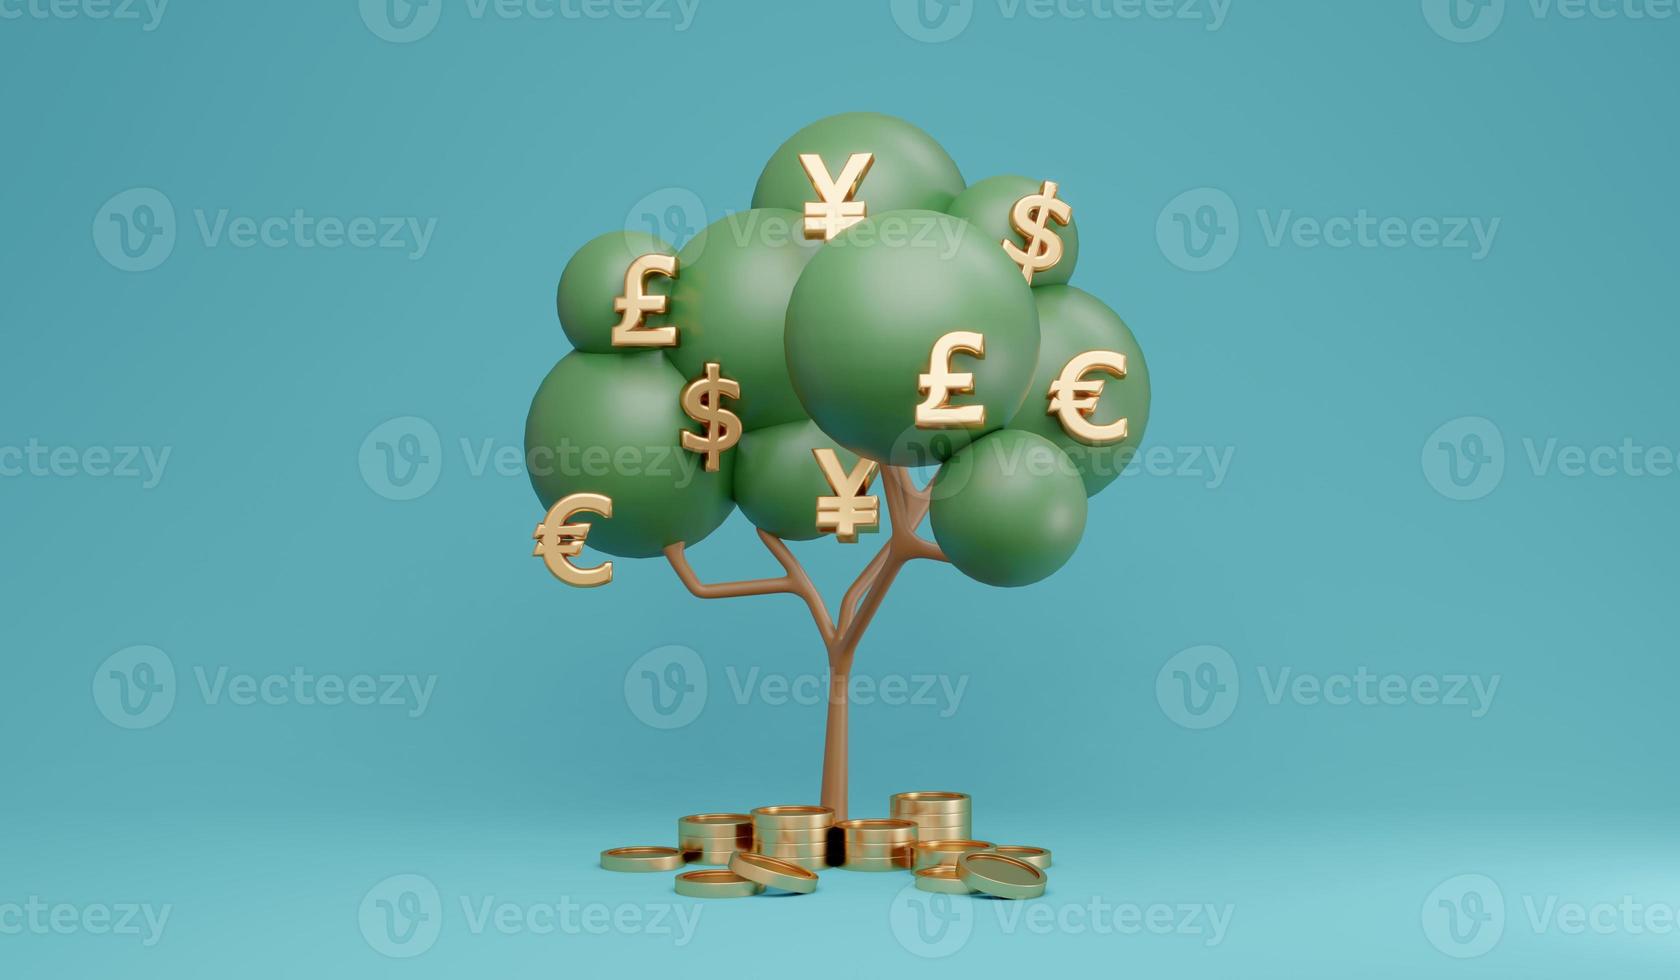 3D Rendering concept of money currencies. Fiat currency money tree on background. Symbols us dollar, pound sterling, euro, japan yen. 3D Render. 3d illustration. photo